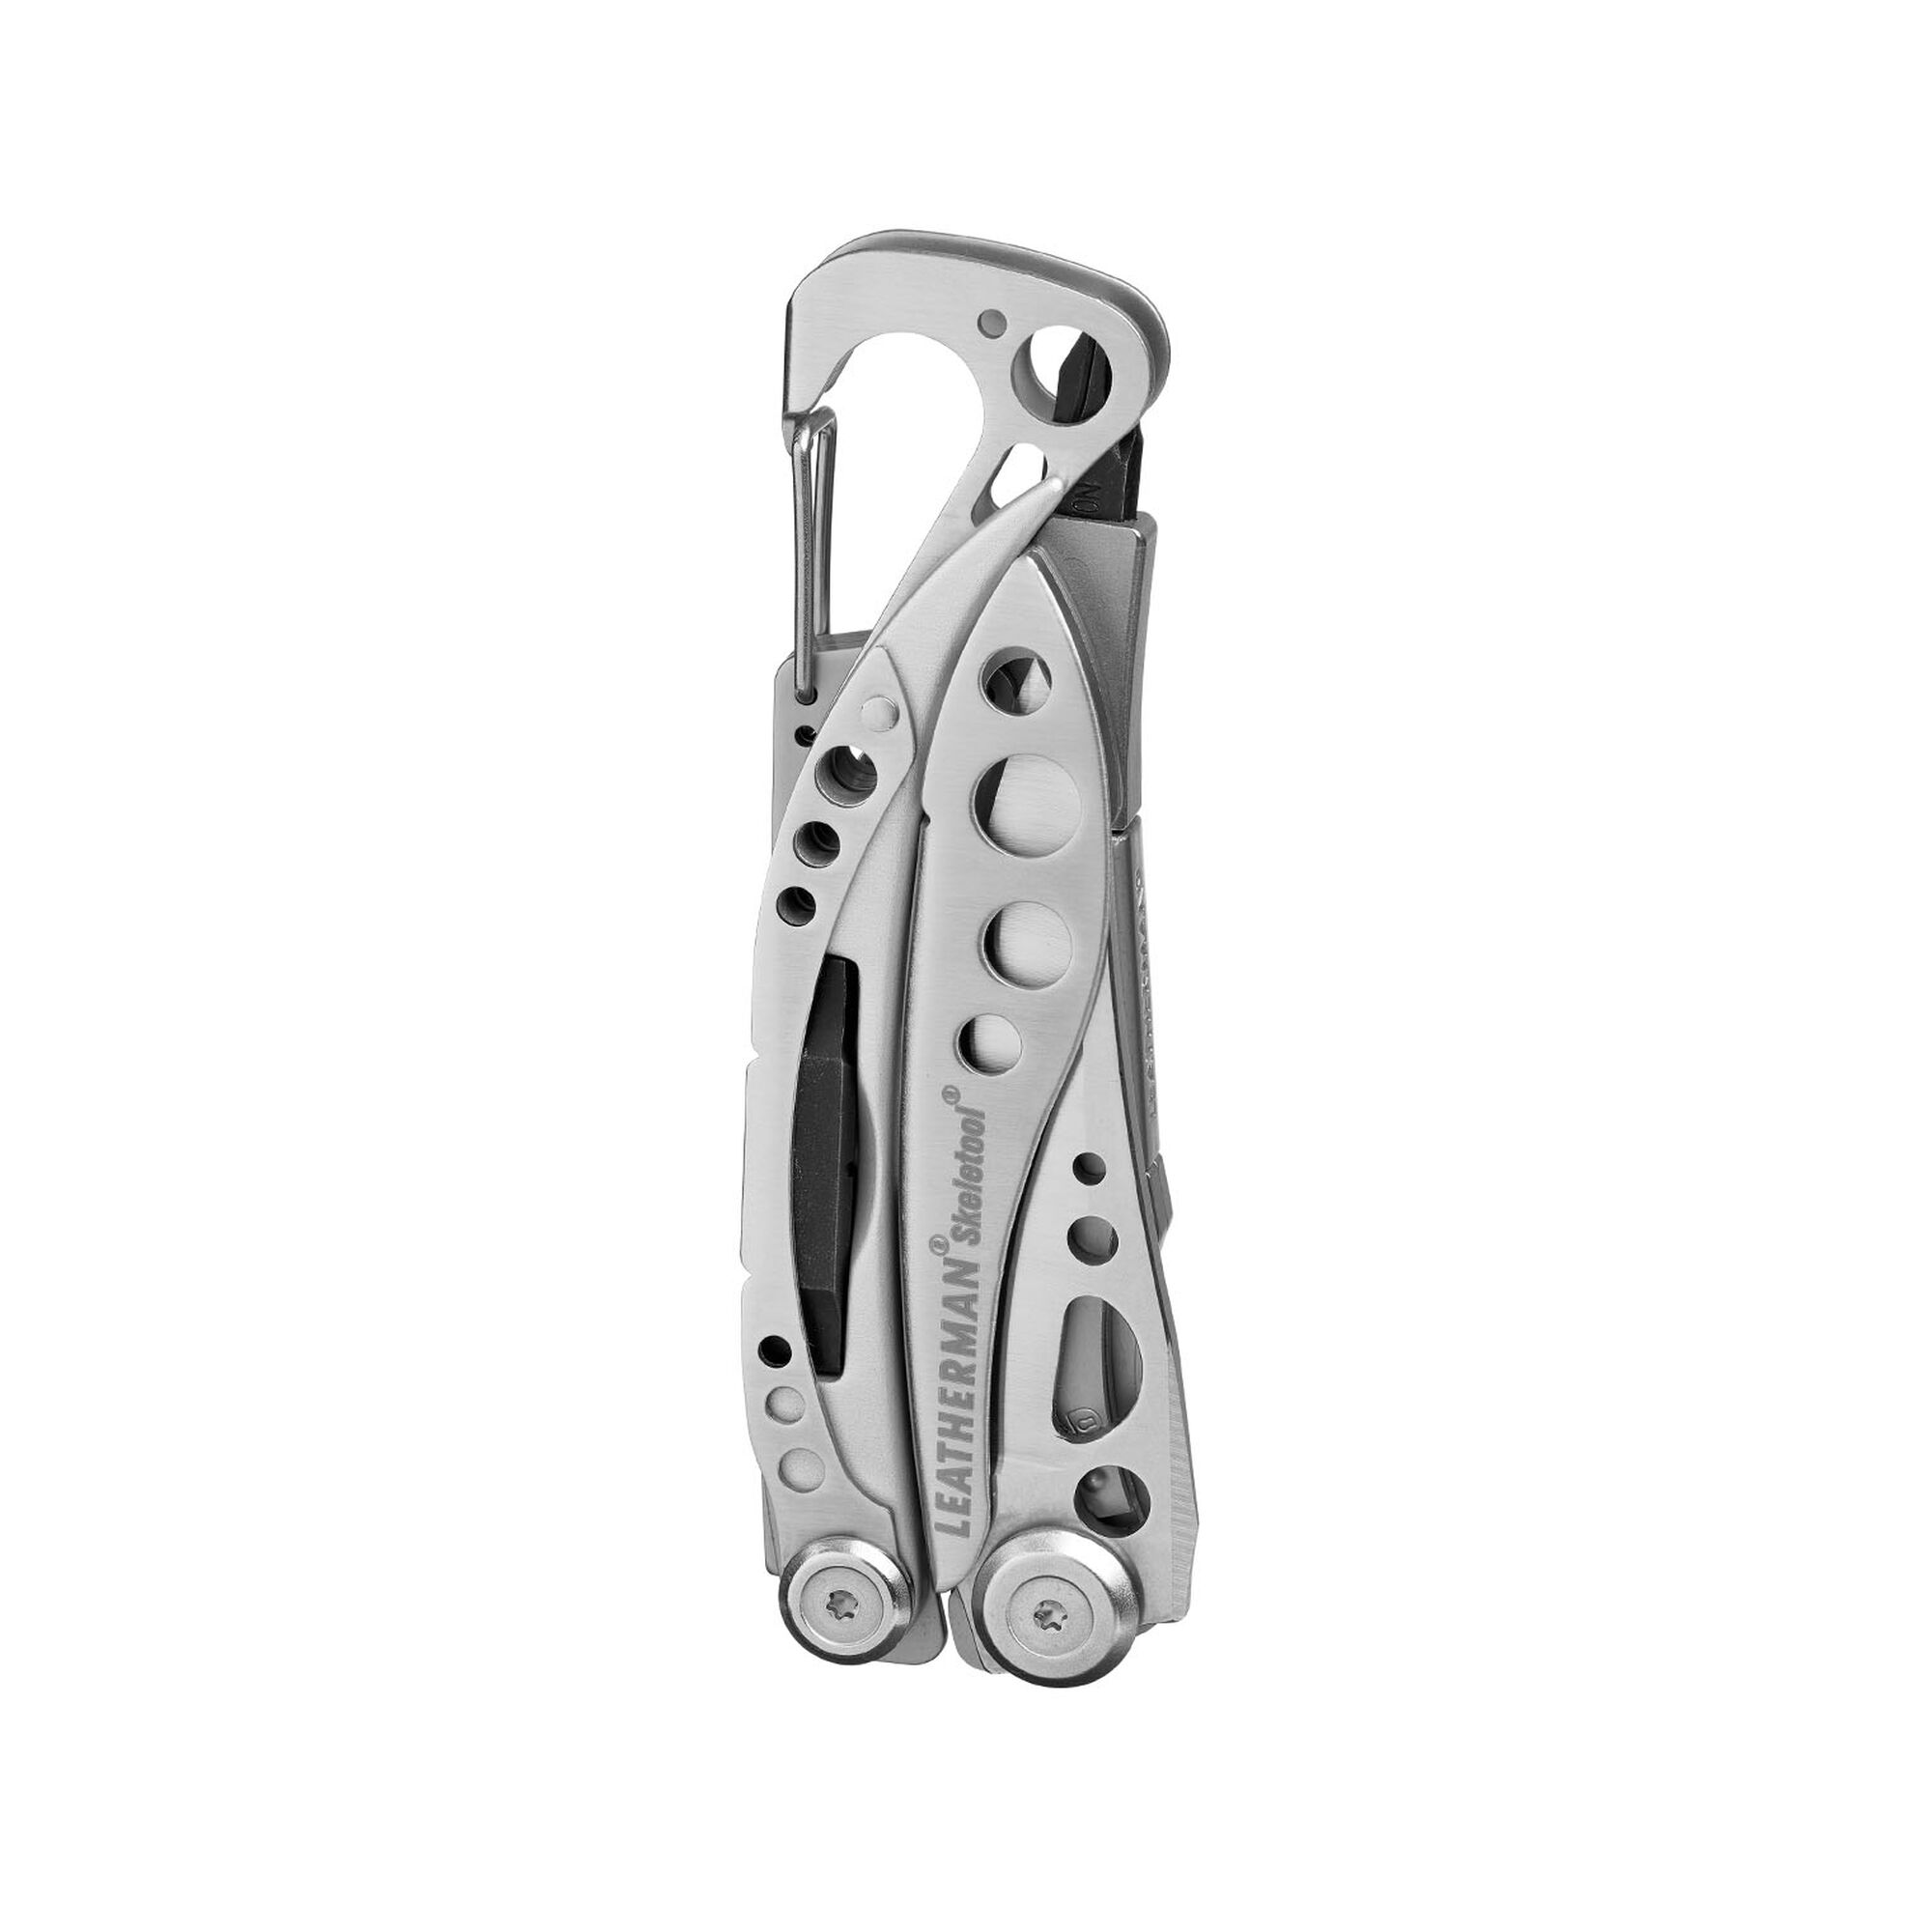 LEATHERMAN, Signal, 19-in-1 Multi-tool for Outdoors, Camping, Hiking,  Fishing, Survival, Durable & Lightweight EDC, Made in the USA, Coyote Tan 